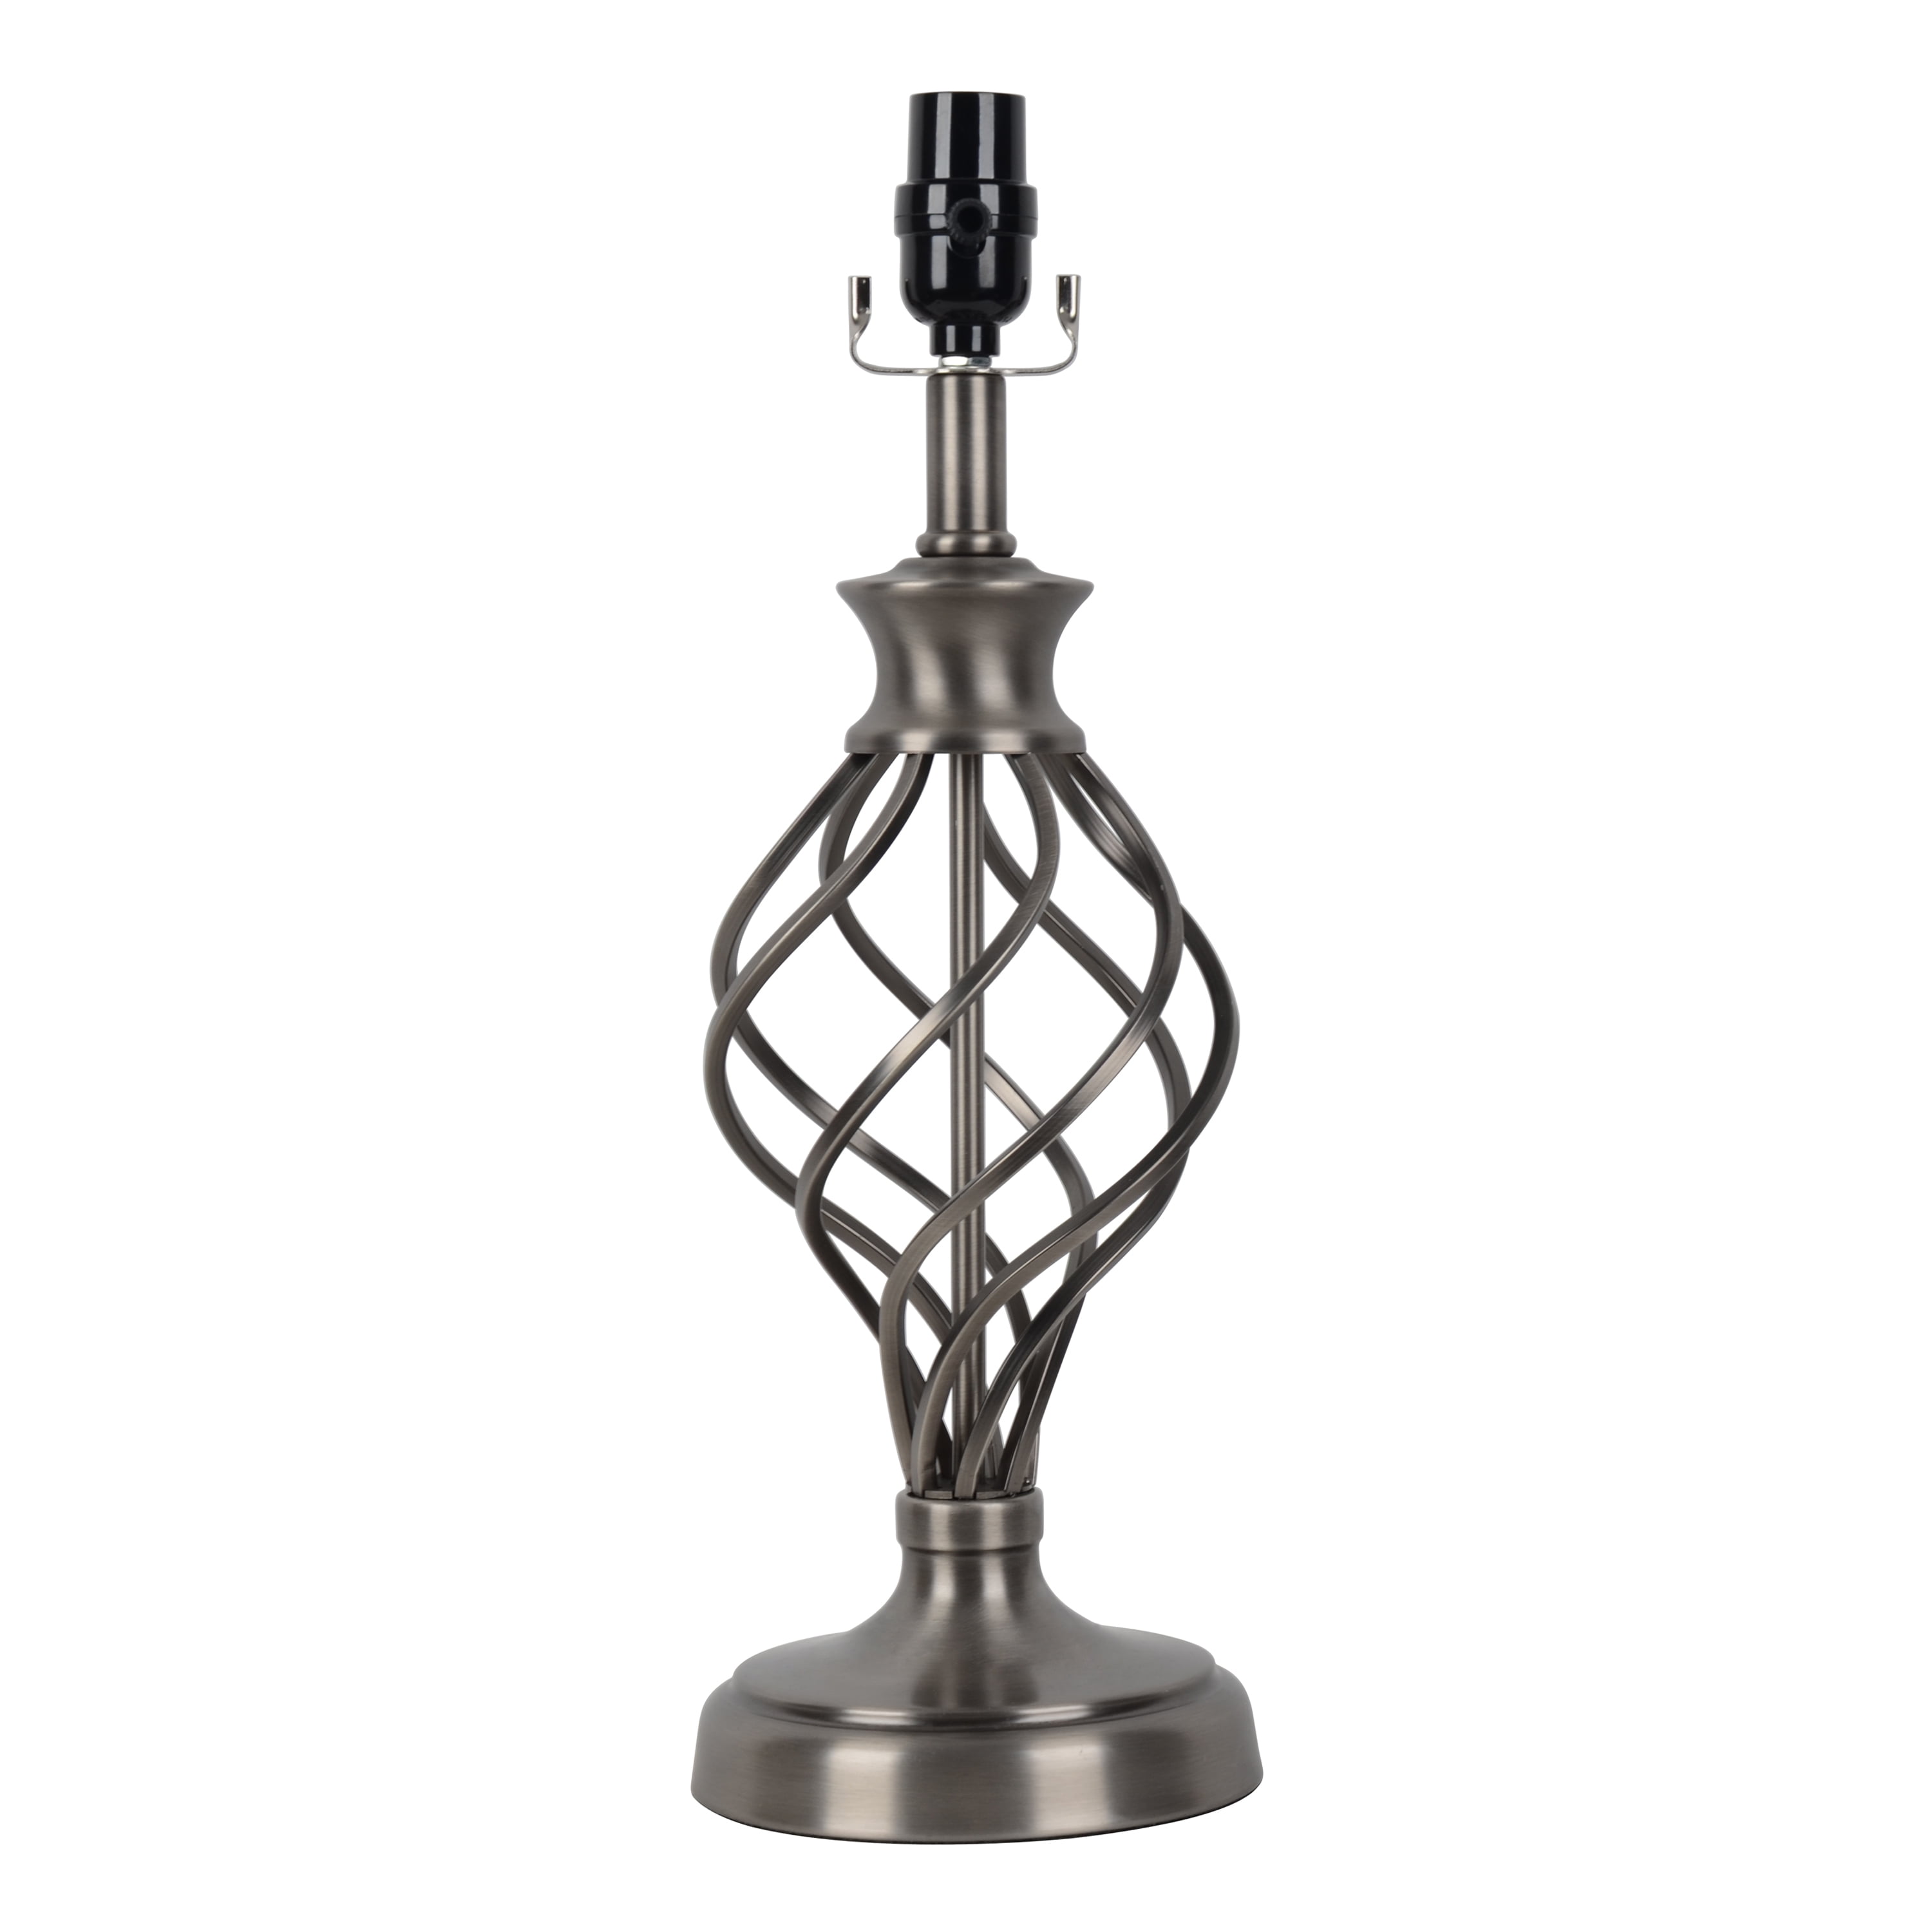 Better Homes & Gardens Metal Twisted Iron Cage Lamp Base, Nickel Finish